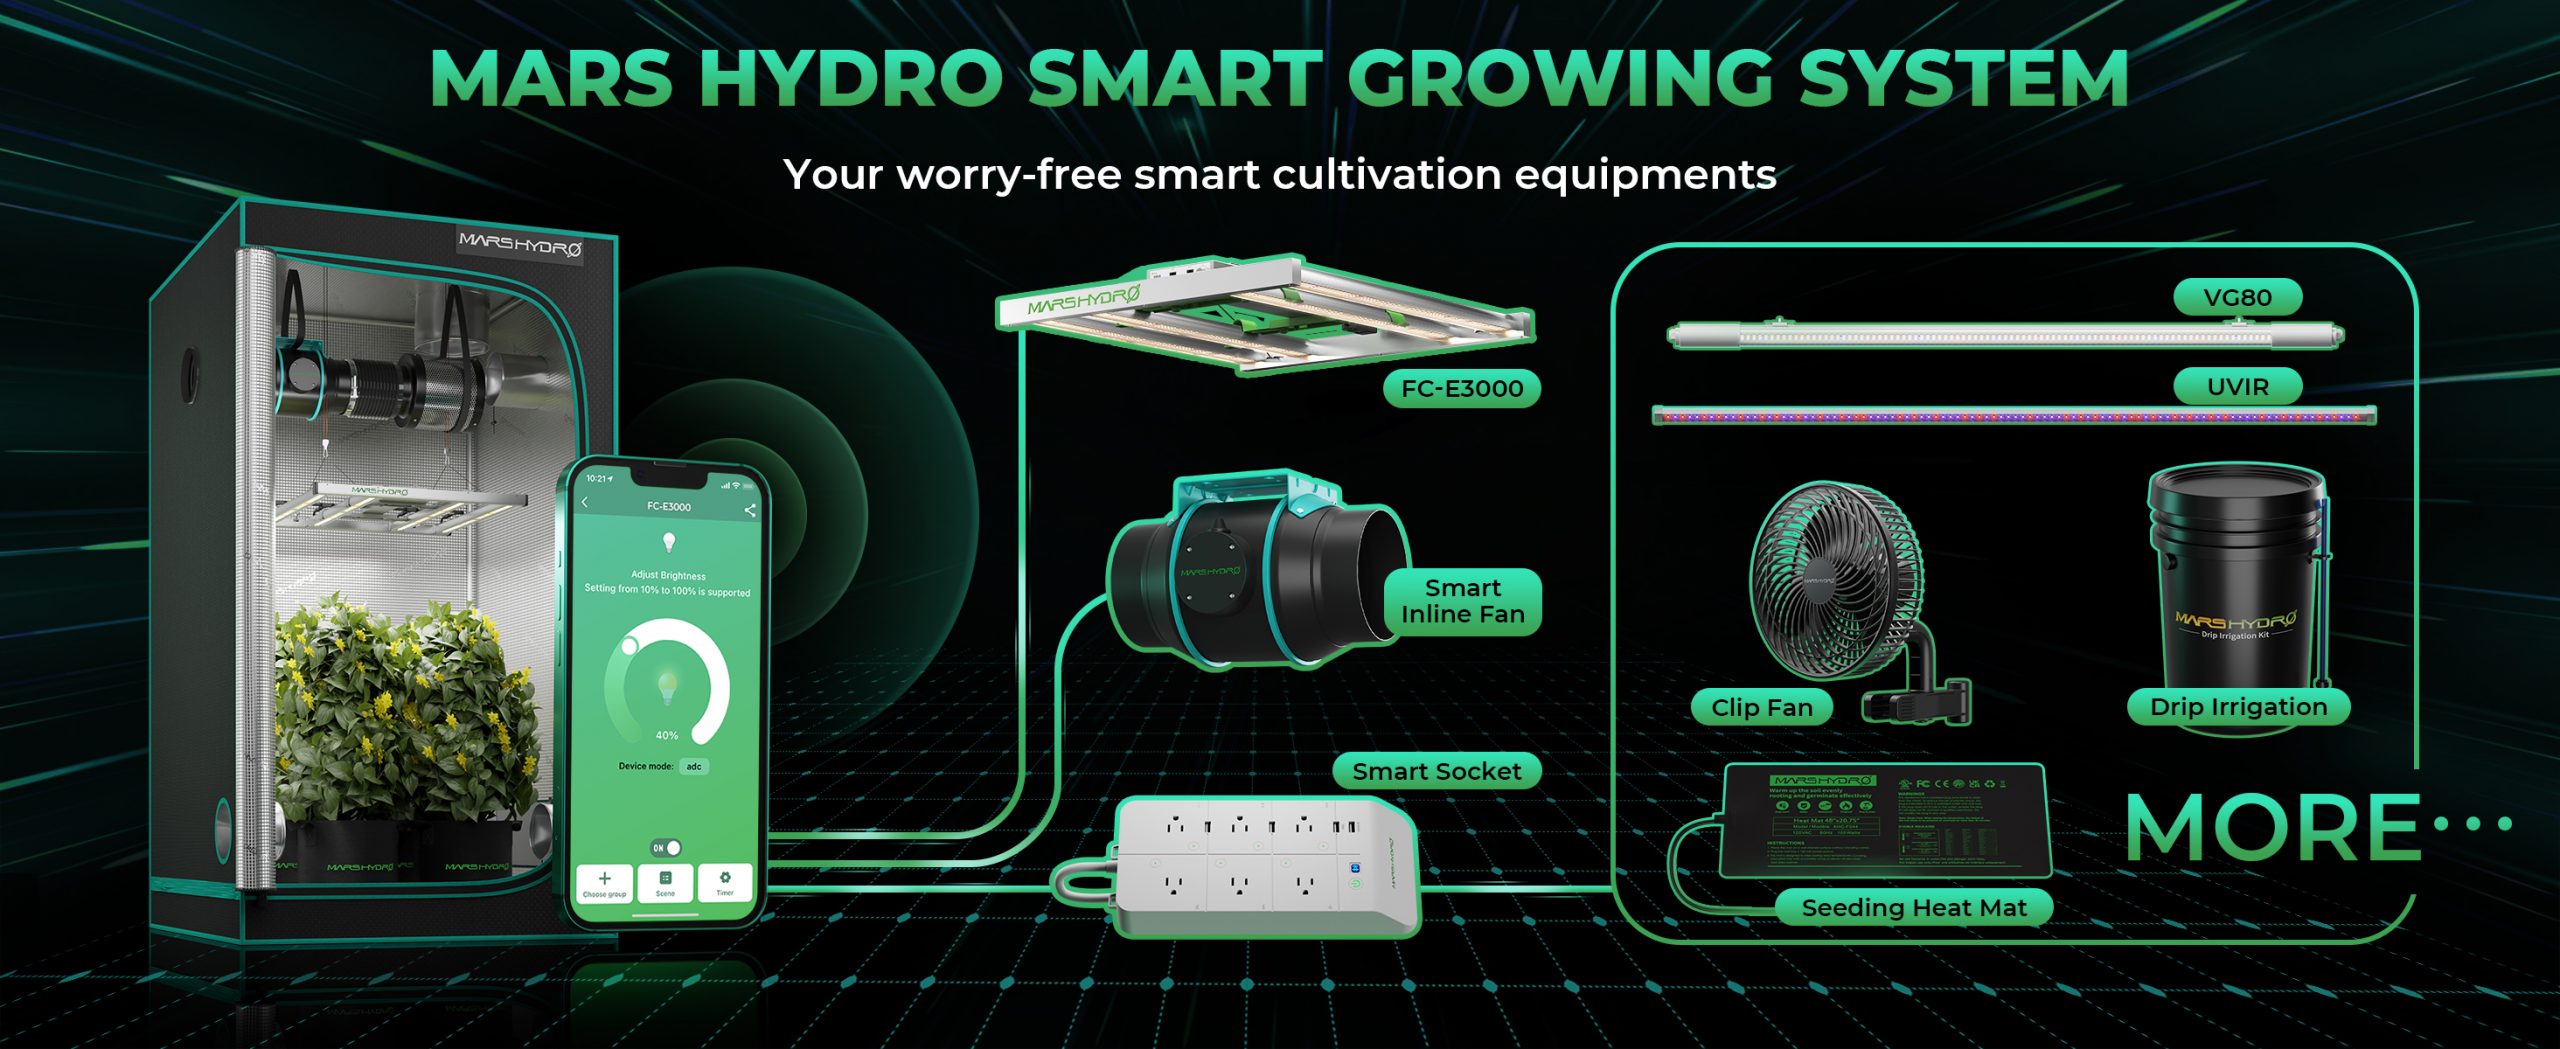 mars hydro smart growing system with fc-e3000 led grow light